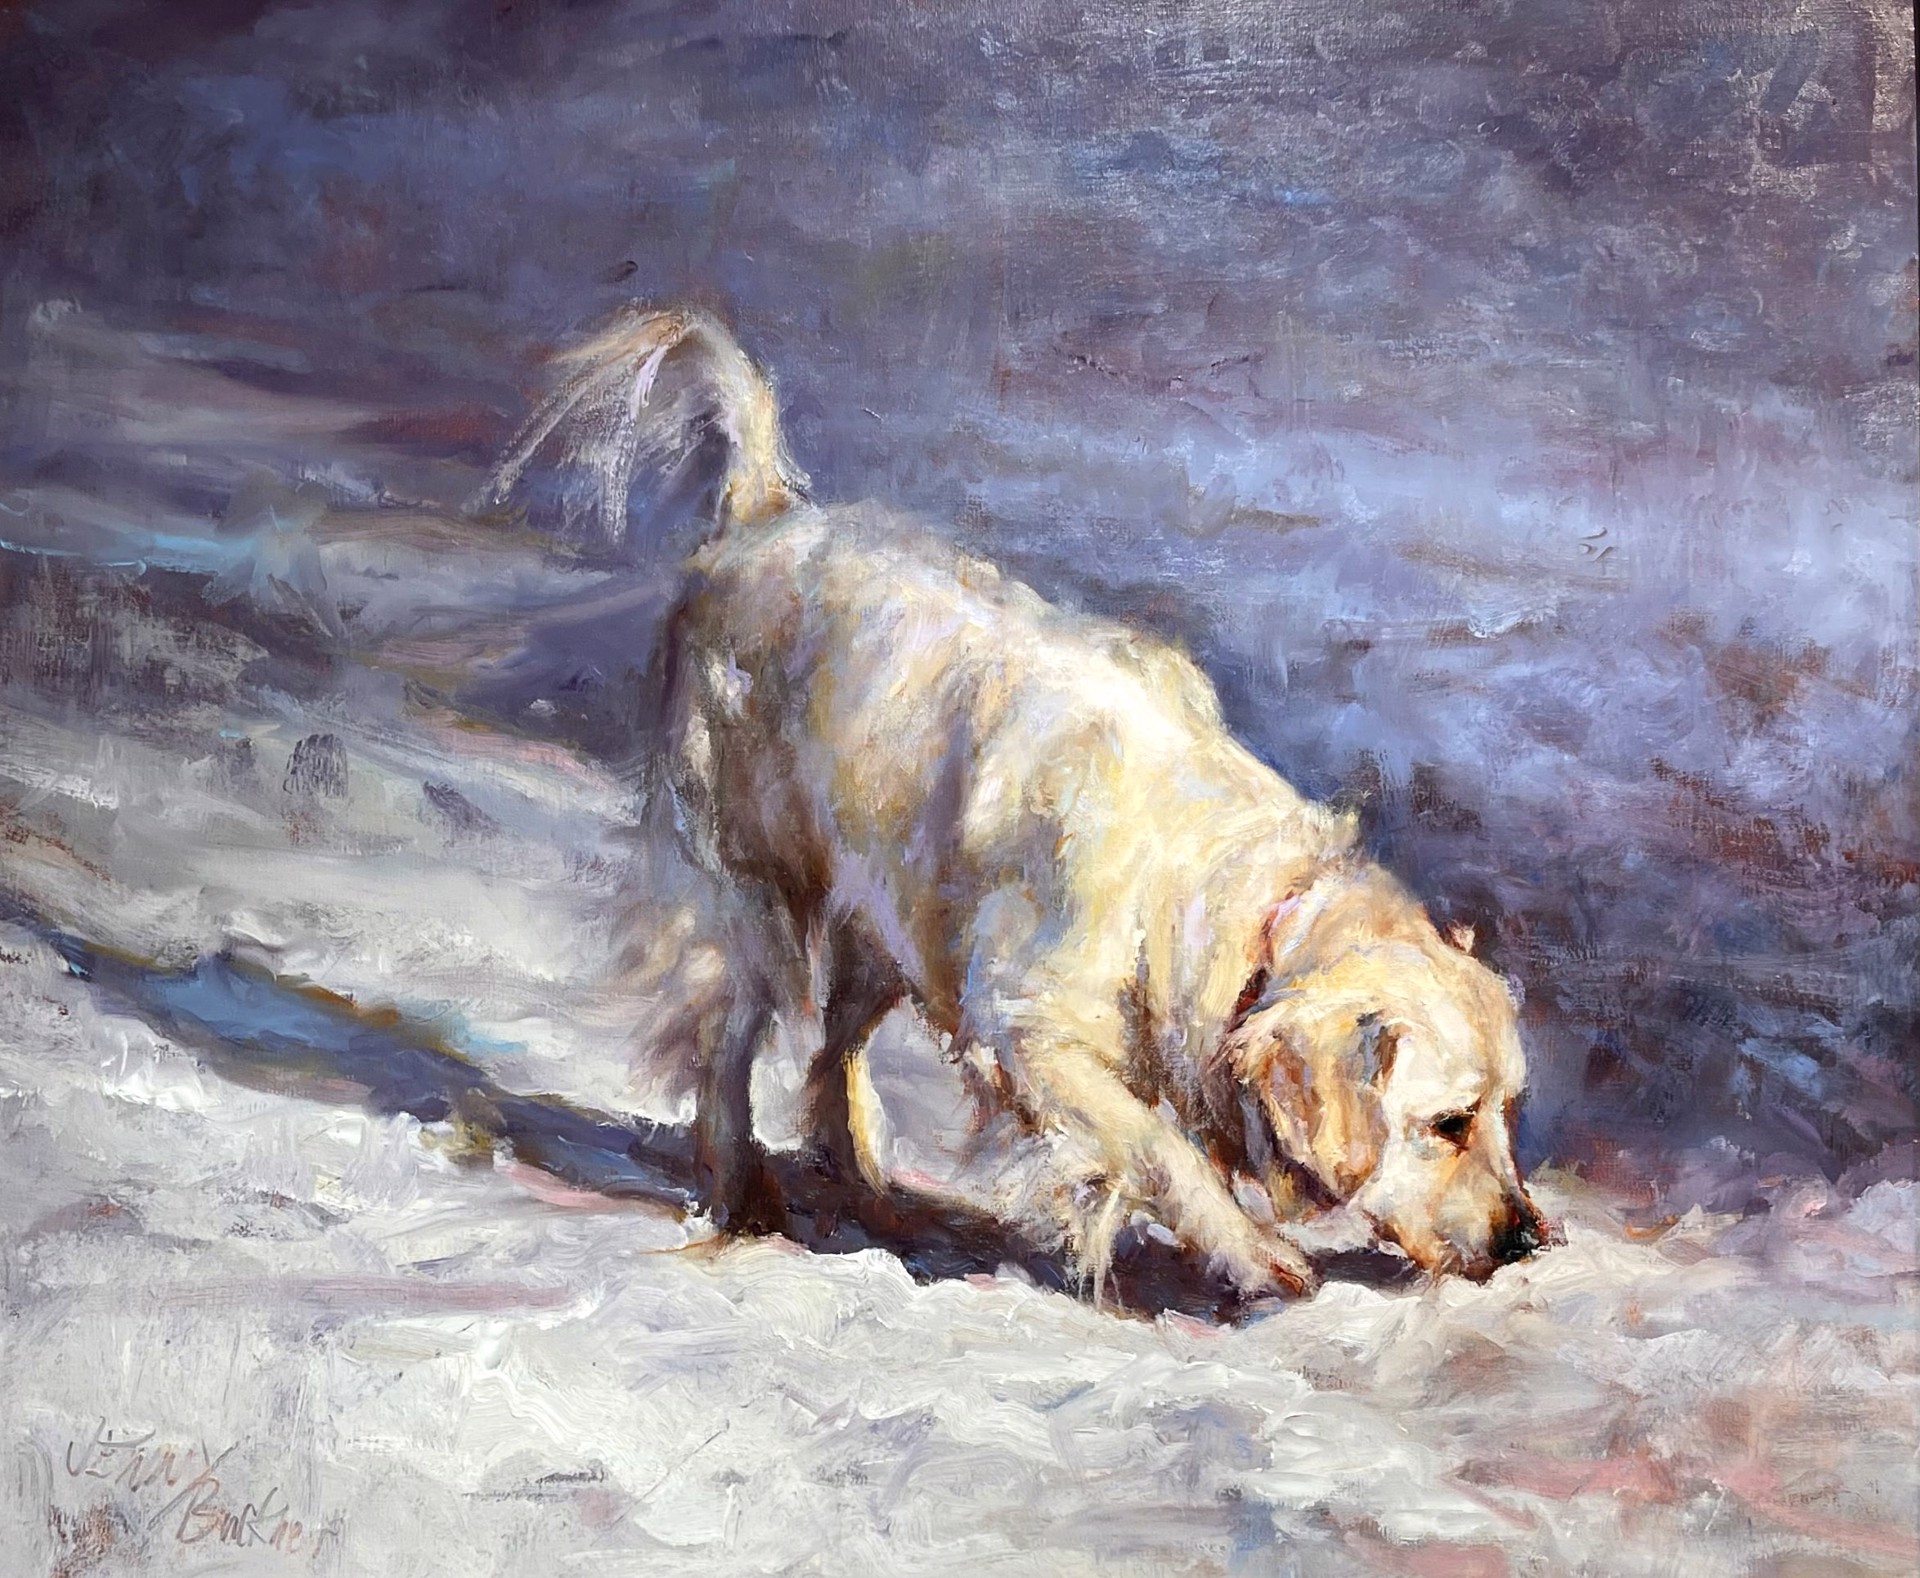 Jenny Buckner "Finding the Trail" by Oil Painters of America